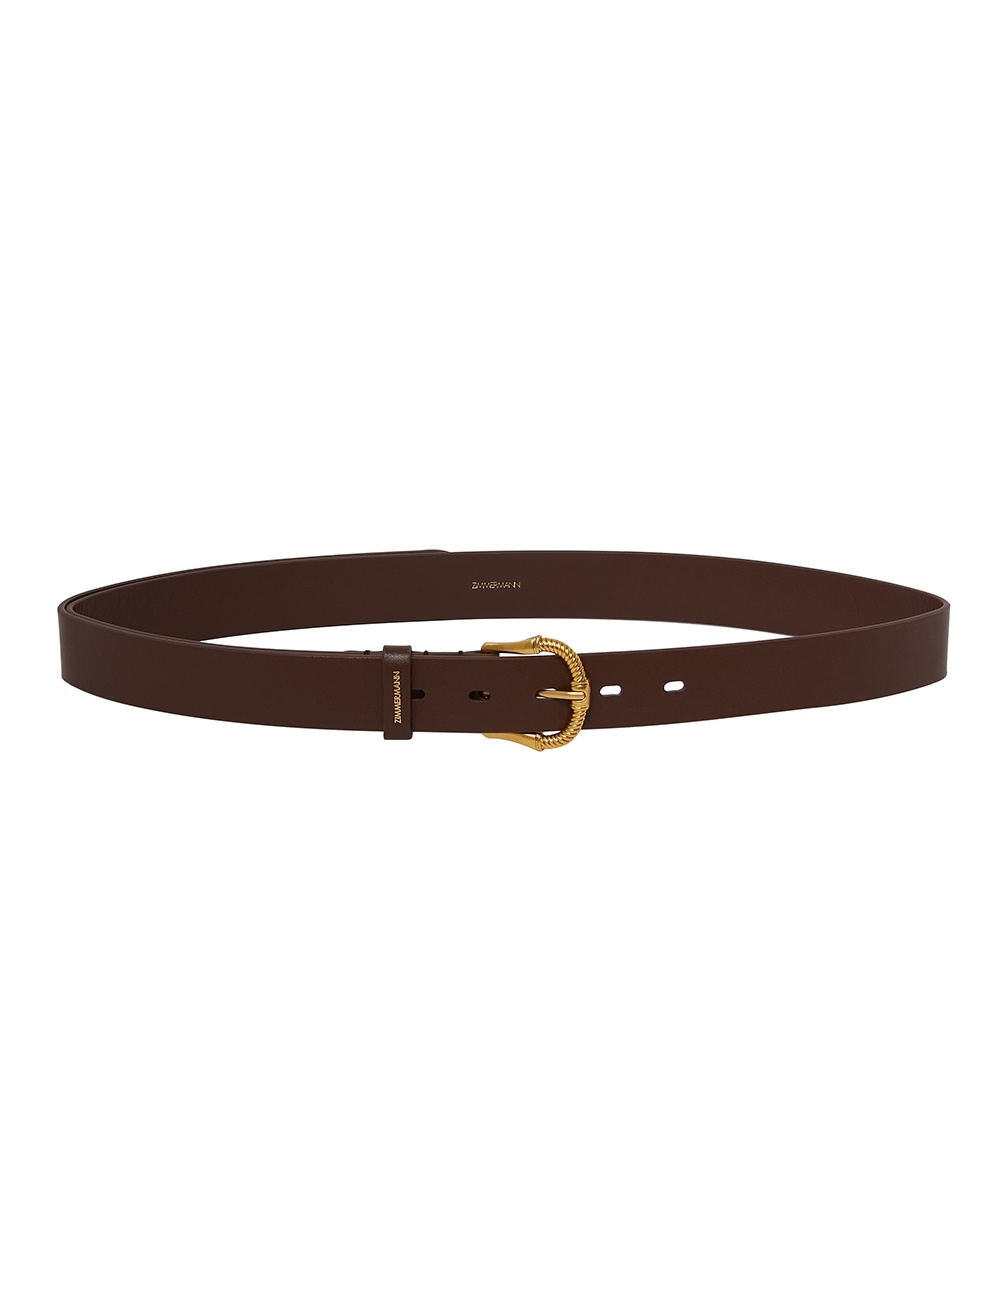 TWISTED BUCKLE LEATHER BELT 30 - 1